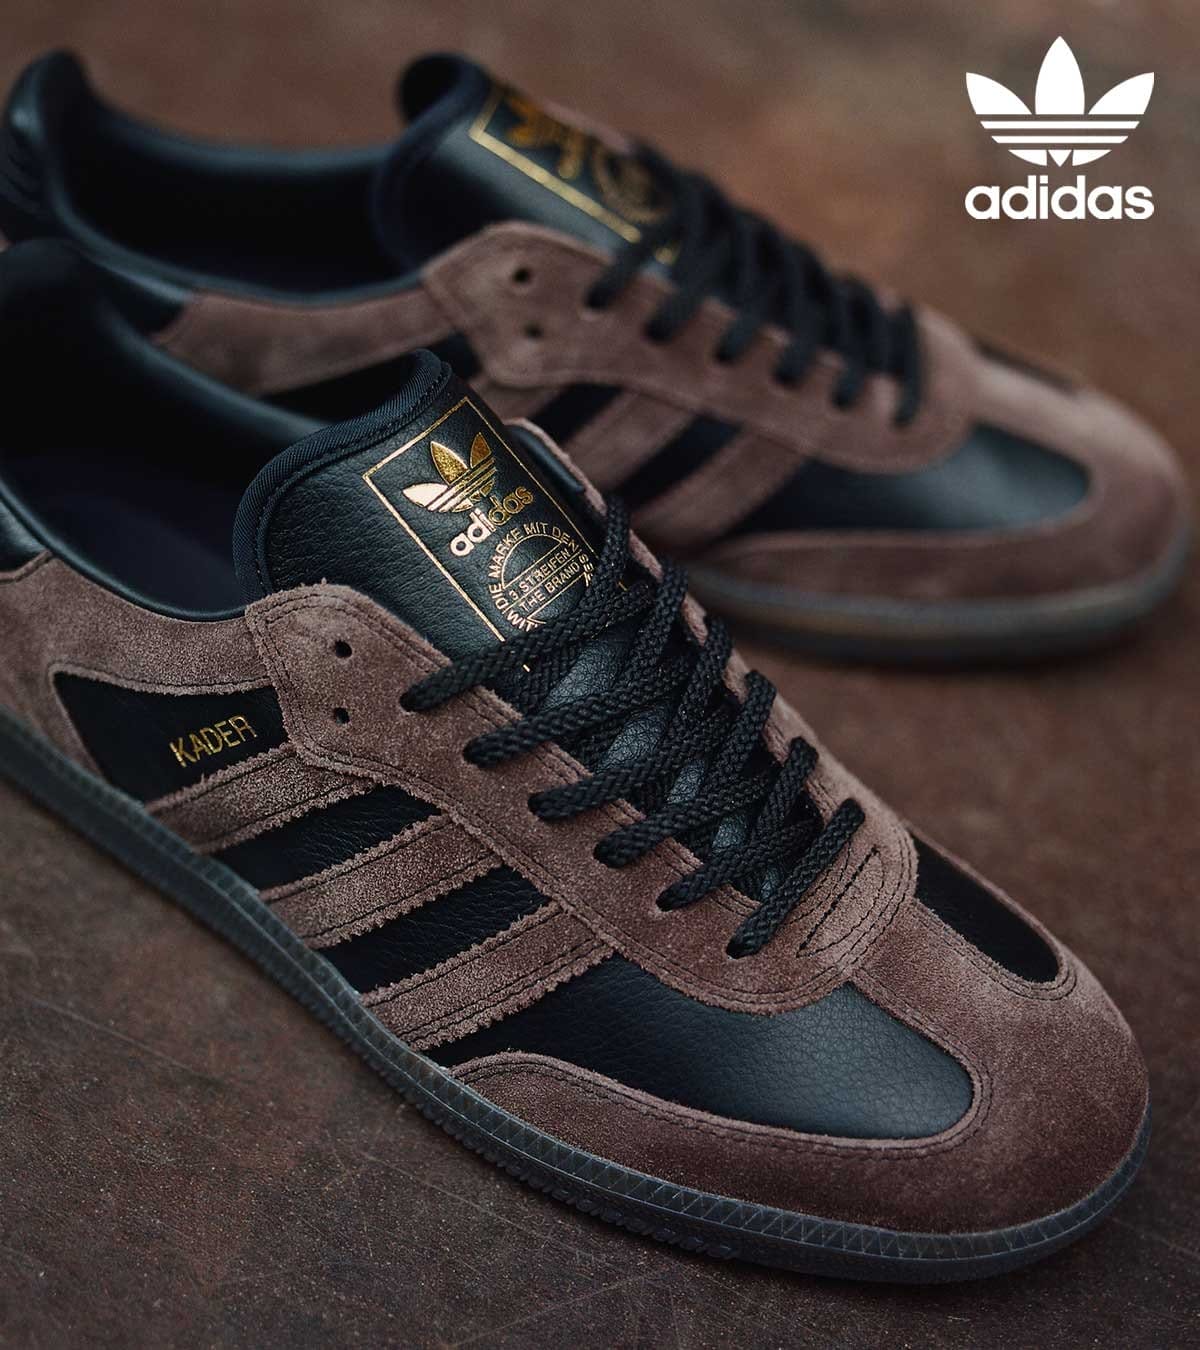 Shop New Shoes from Adidas ft. New Samba Styles